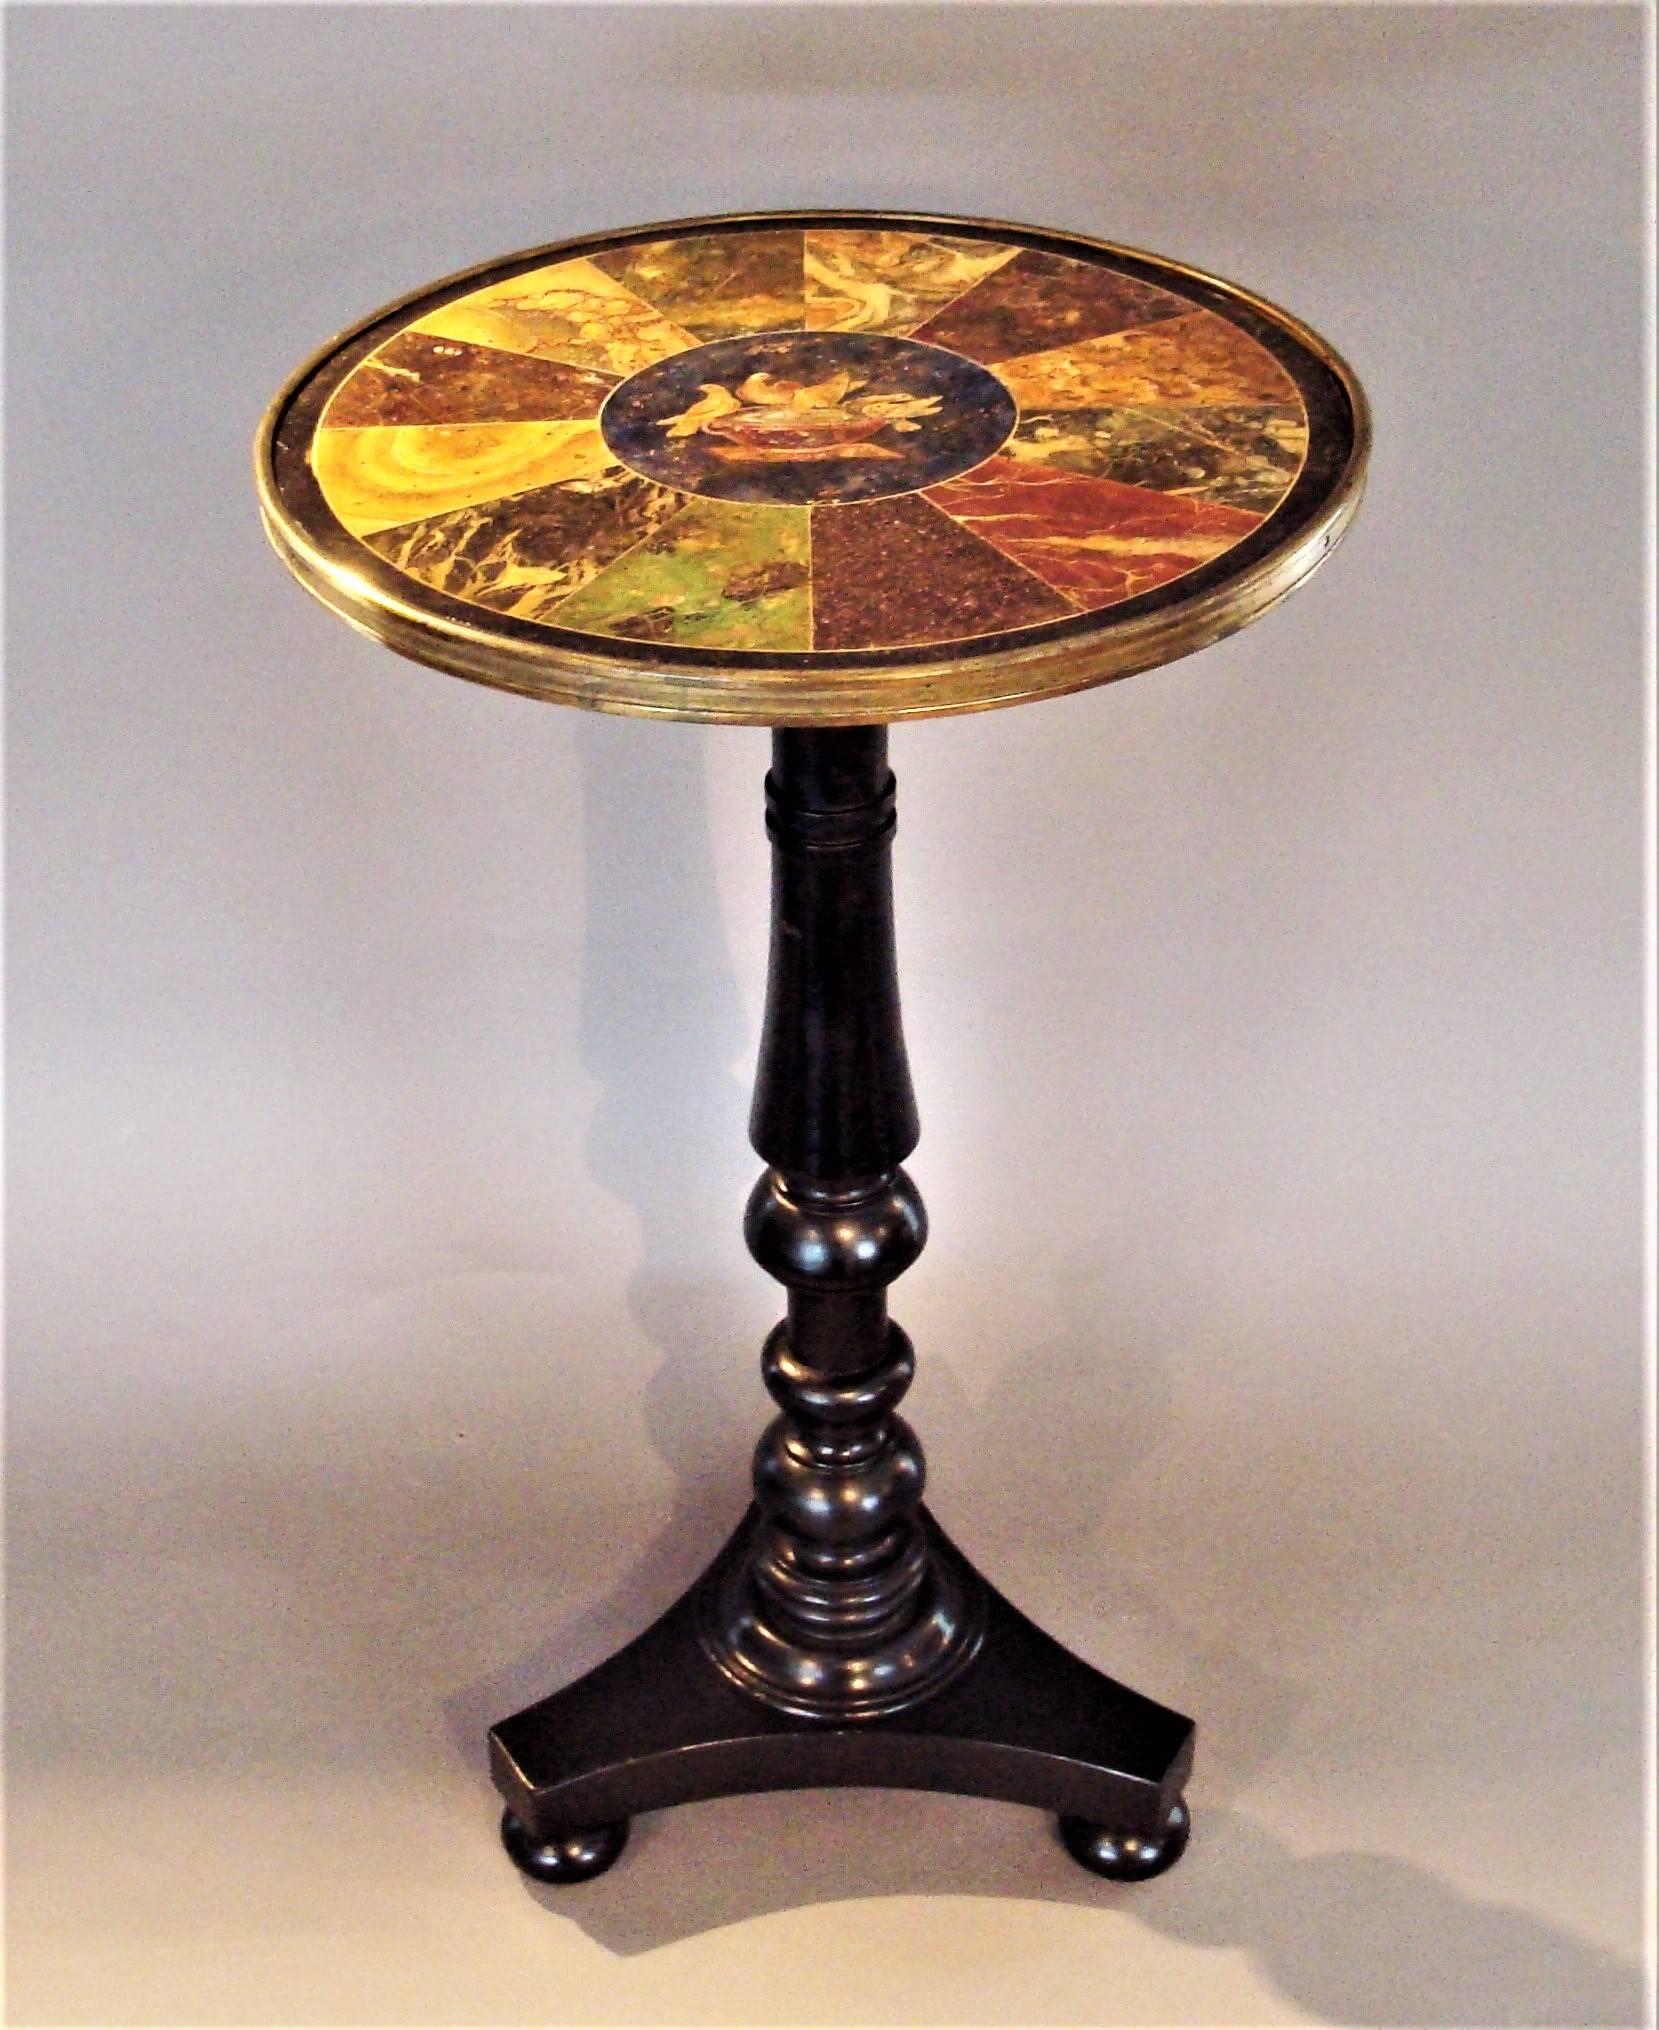 English Regency Painted Simulated Marble-Top Table For Sale